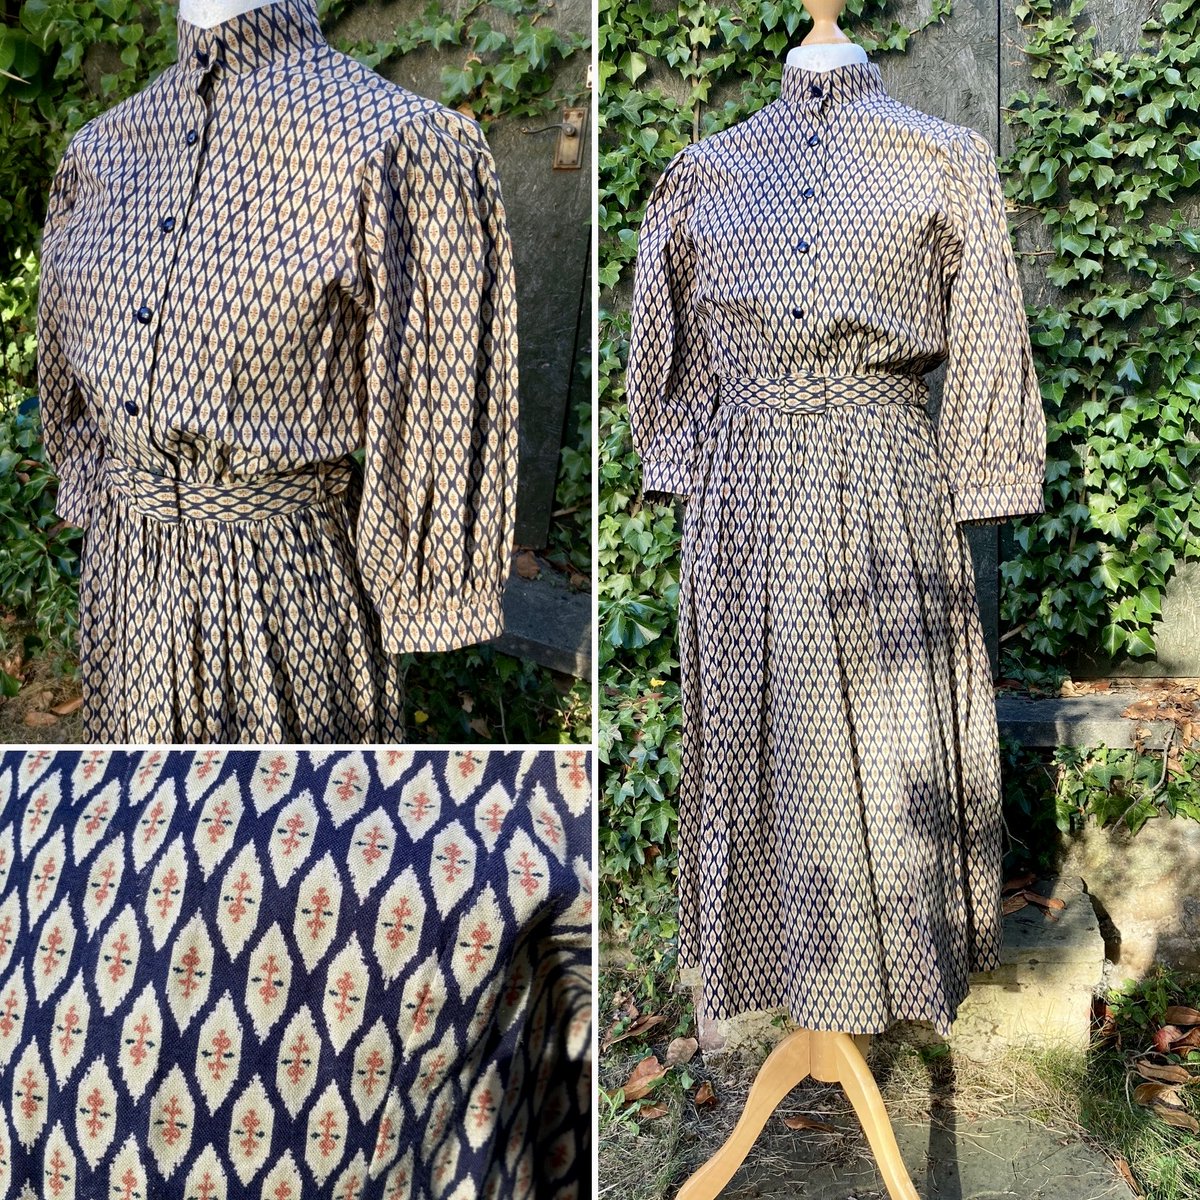 I love this #1970s  #1980s #prairiedress #vintageshowandsell , the #victorian inspired print, and #highneck with gathered sleeve-head give it a #quirky #littlehouseontheprairie #autumndress #vintagestyle #vintagefashion #1970sdress #80sstyle #etsy.com/uk/shop/GINGERMINTVINTAGE